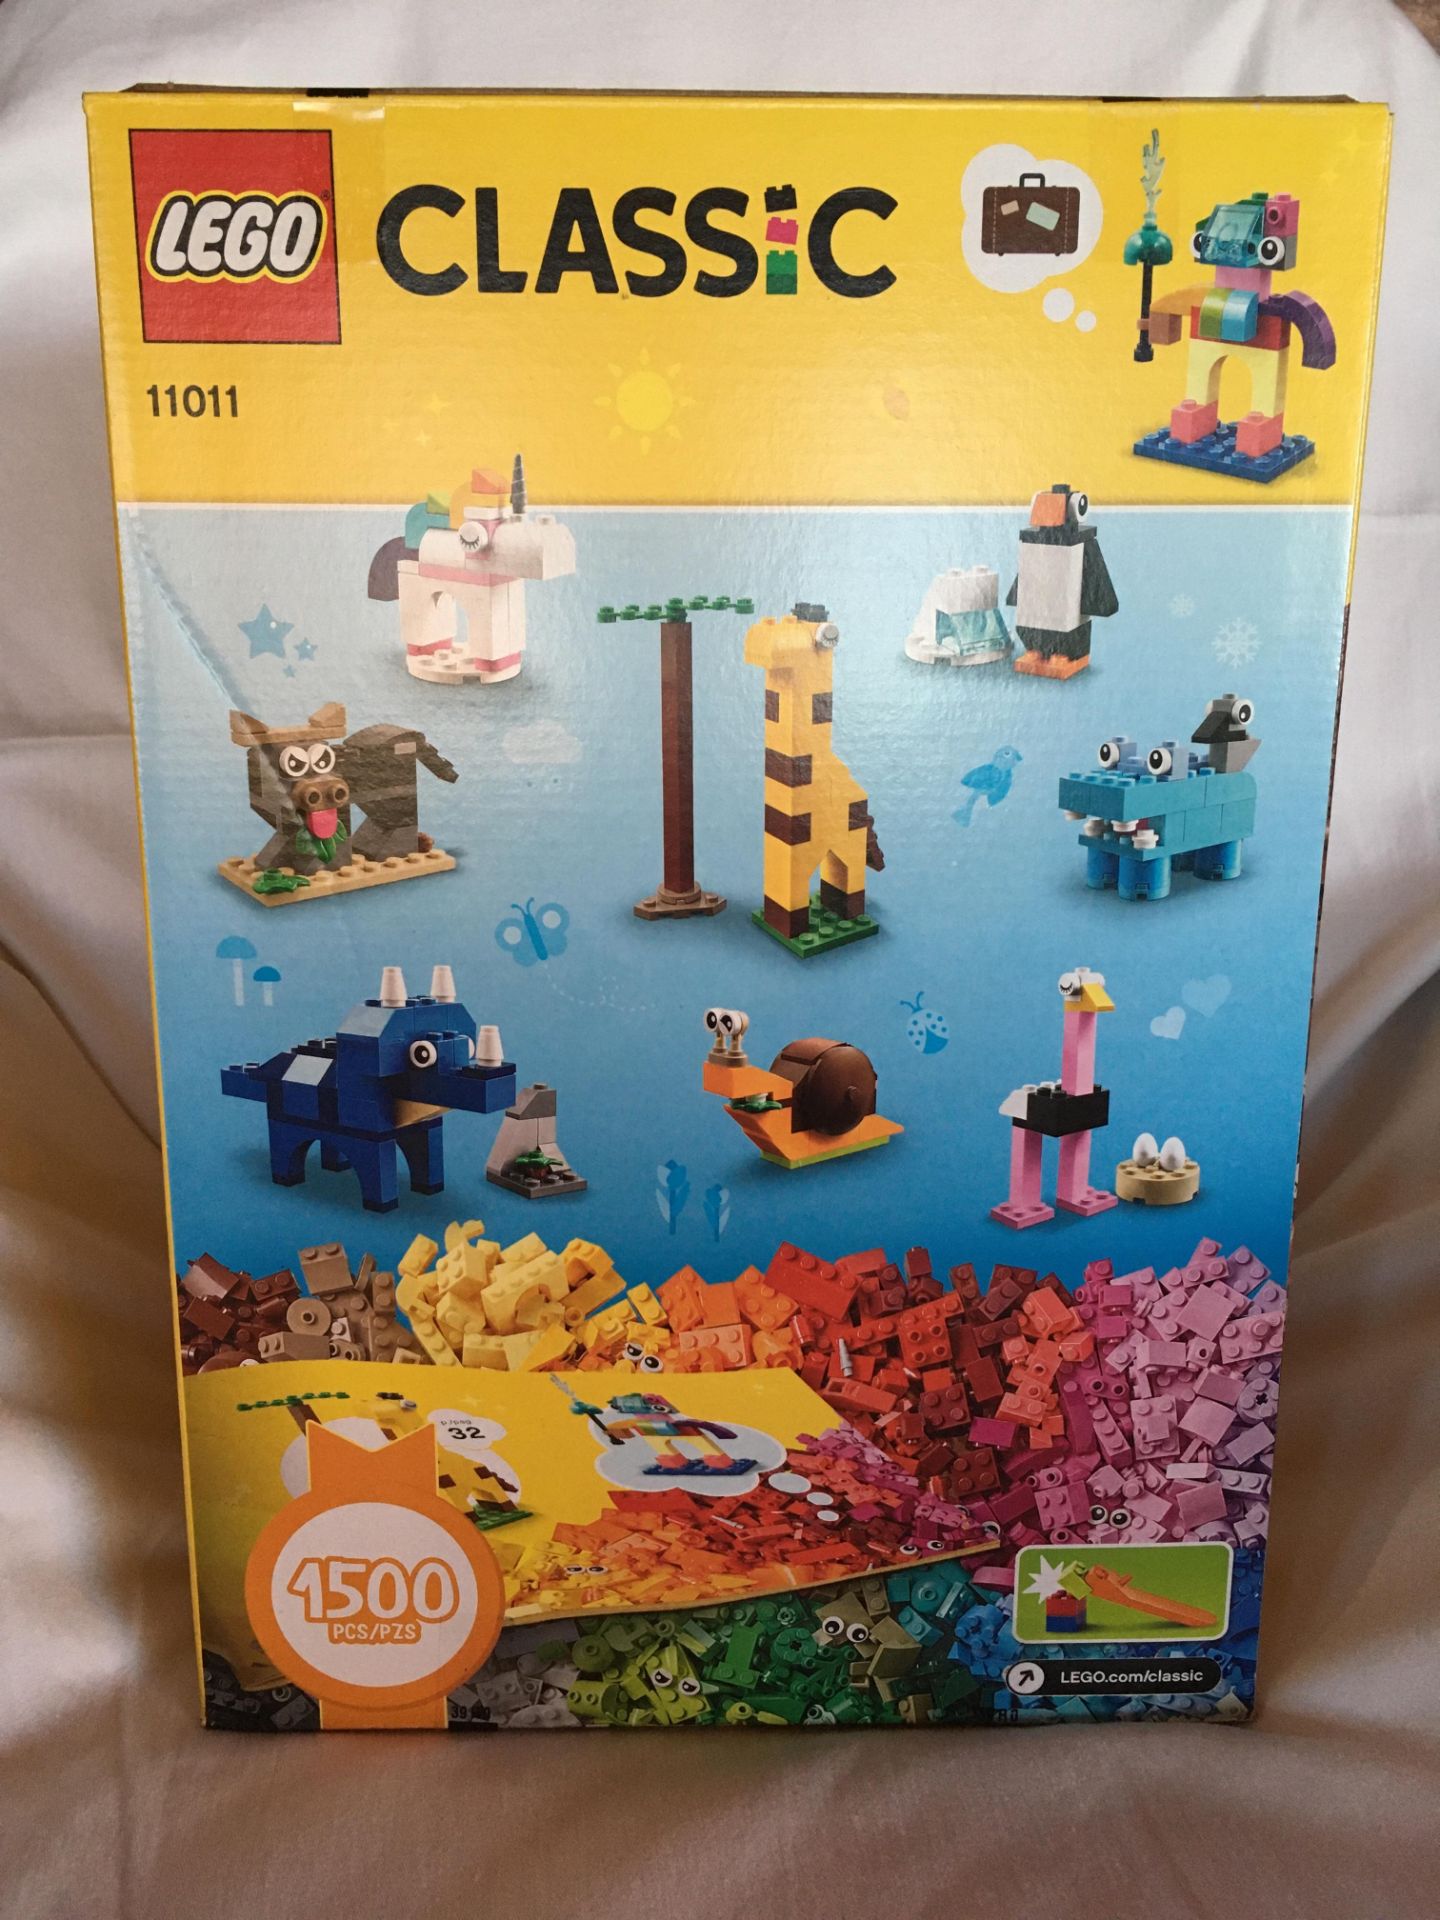 1,500 PIECES OF CLASSIC LEGO Donated by: Laura Grinde Value: $75.00 - Image 2 of 2